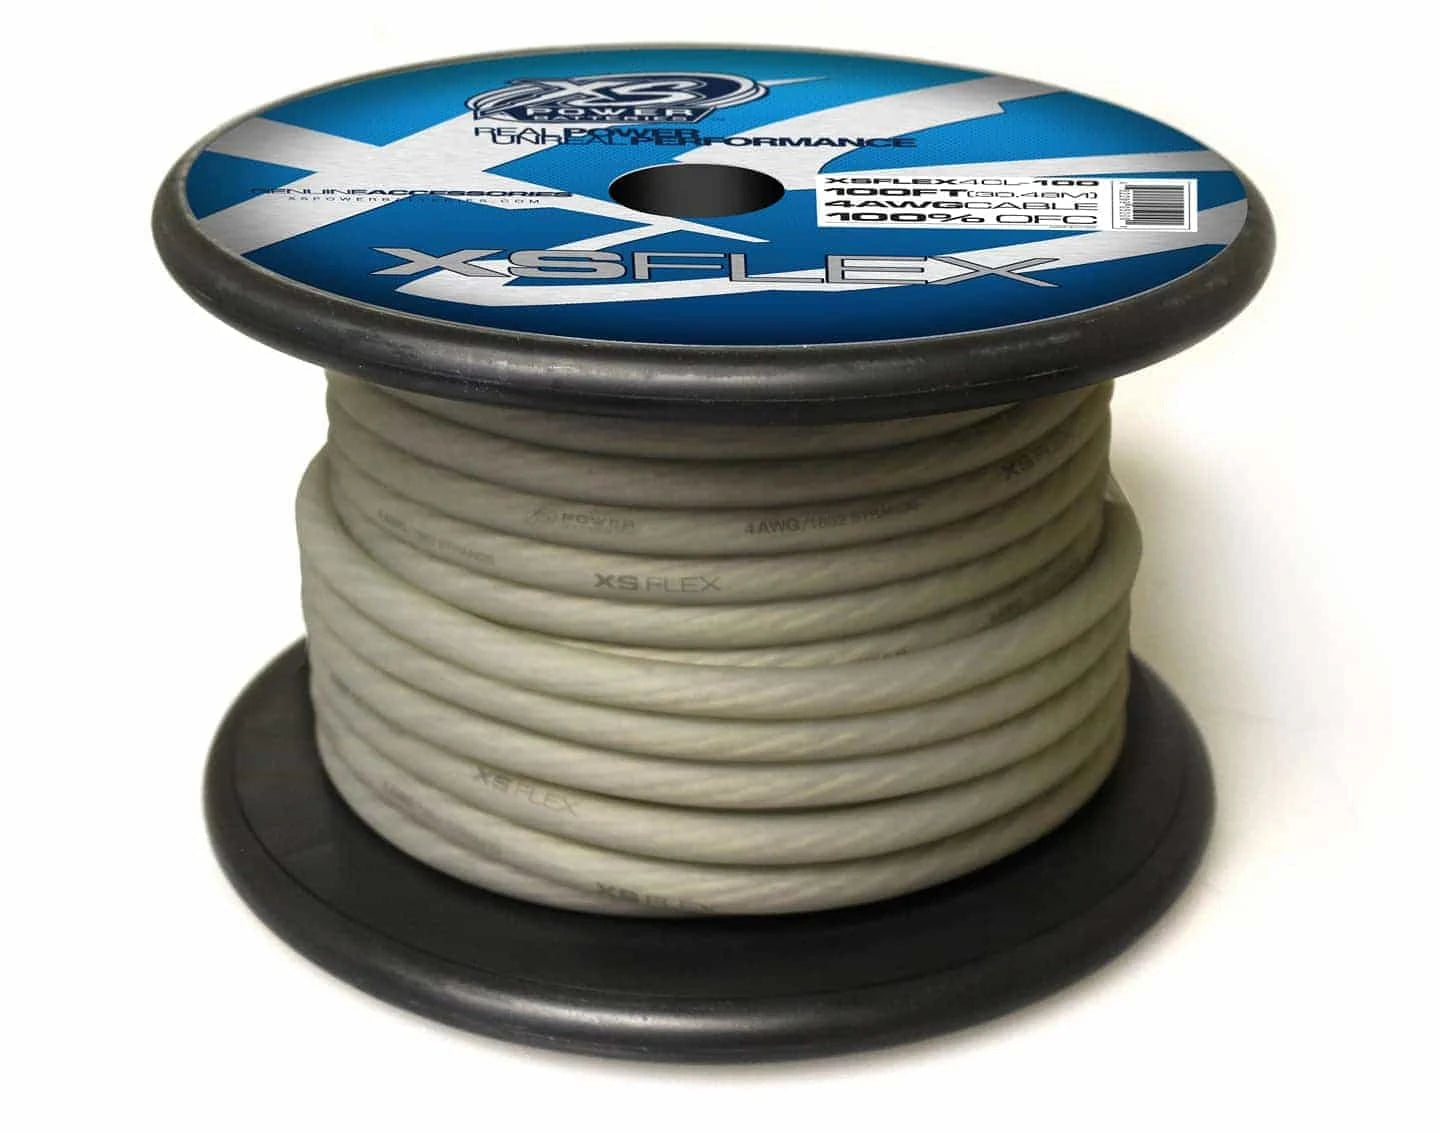 XS Power 4 AWG Gauge XS Flex 100% Oxygen Free Tinned Copper Power and Ground Cable 100ft Spool Electrical Wire